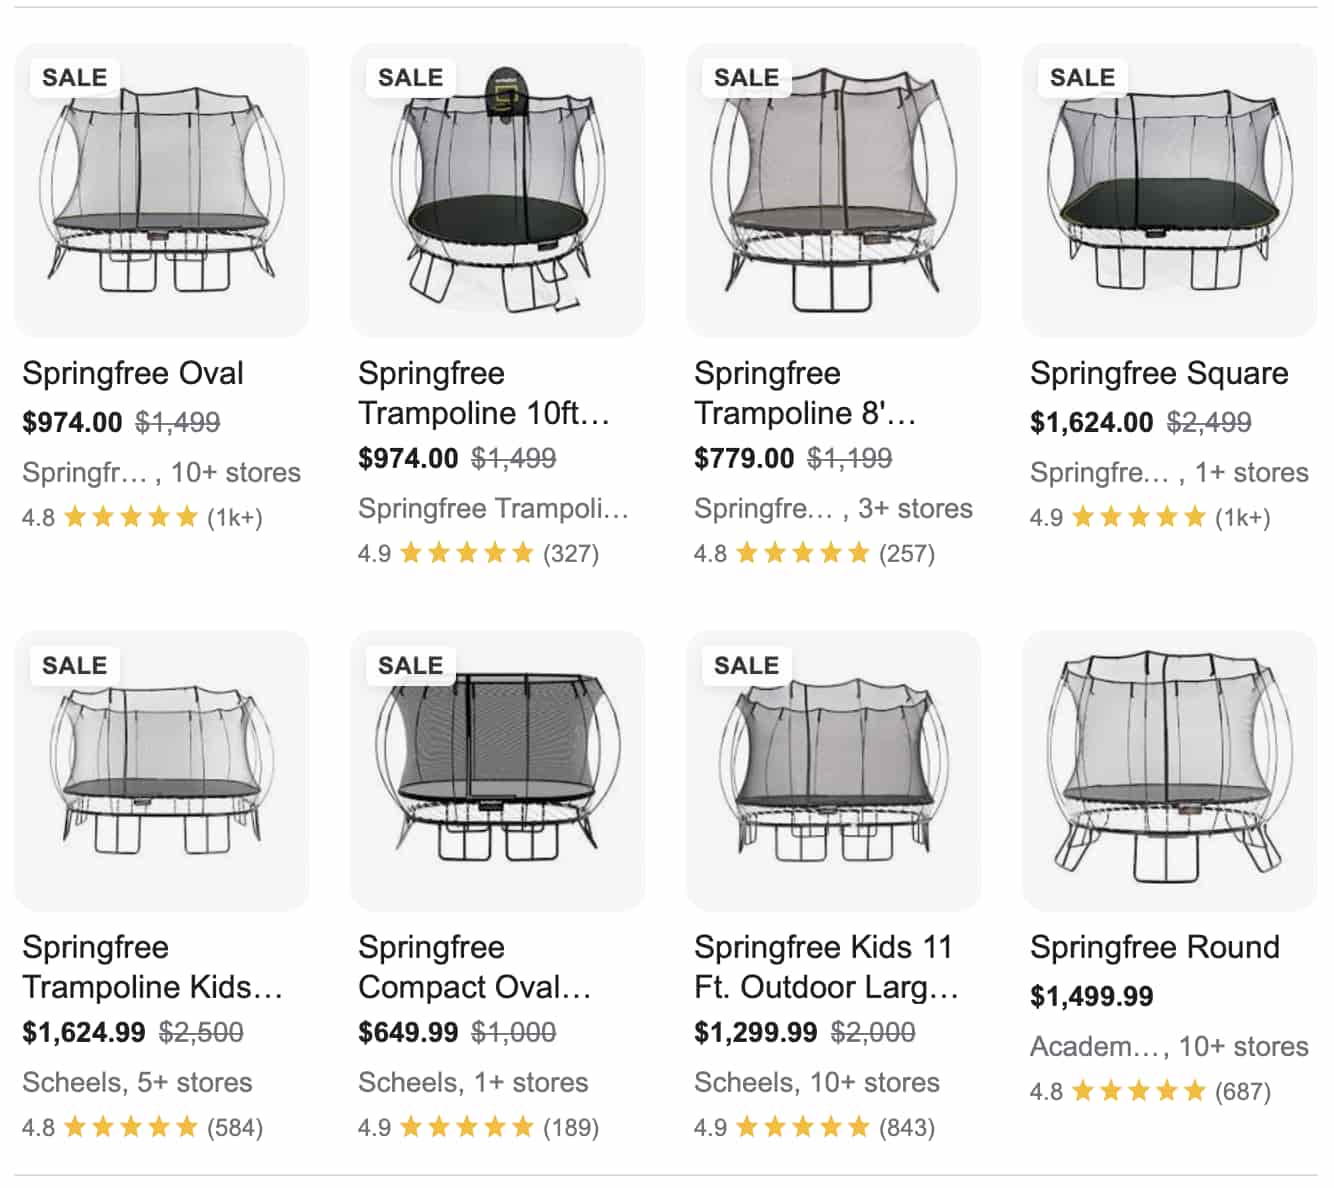 Online reviews for Springfree Trampolines.